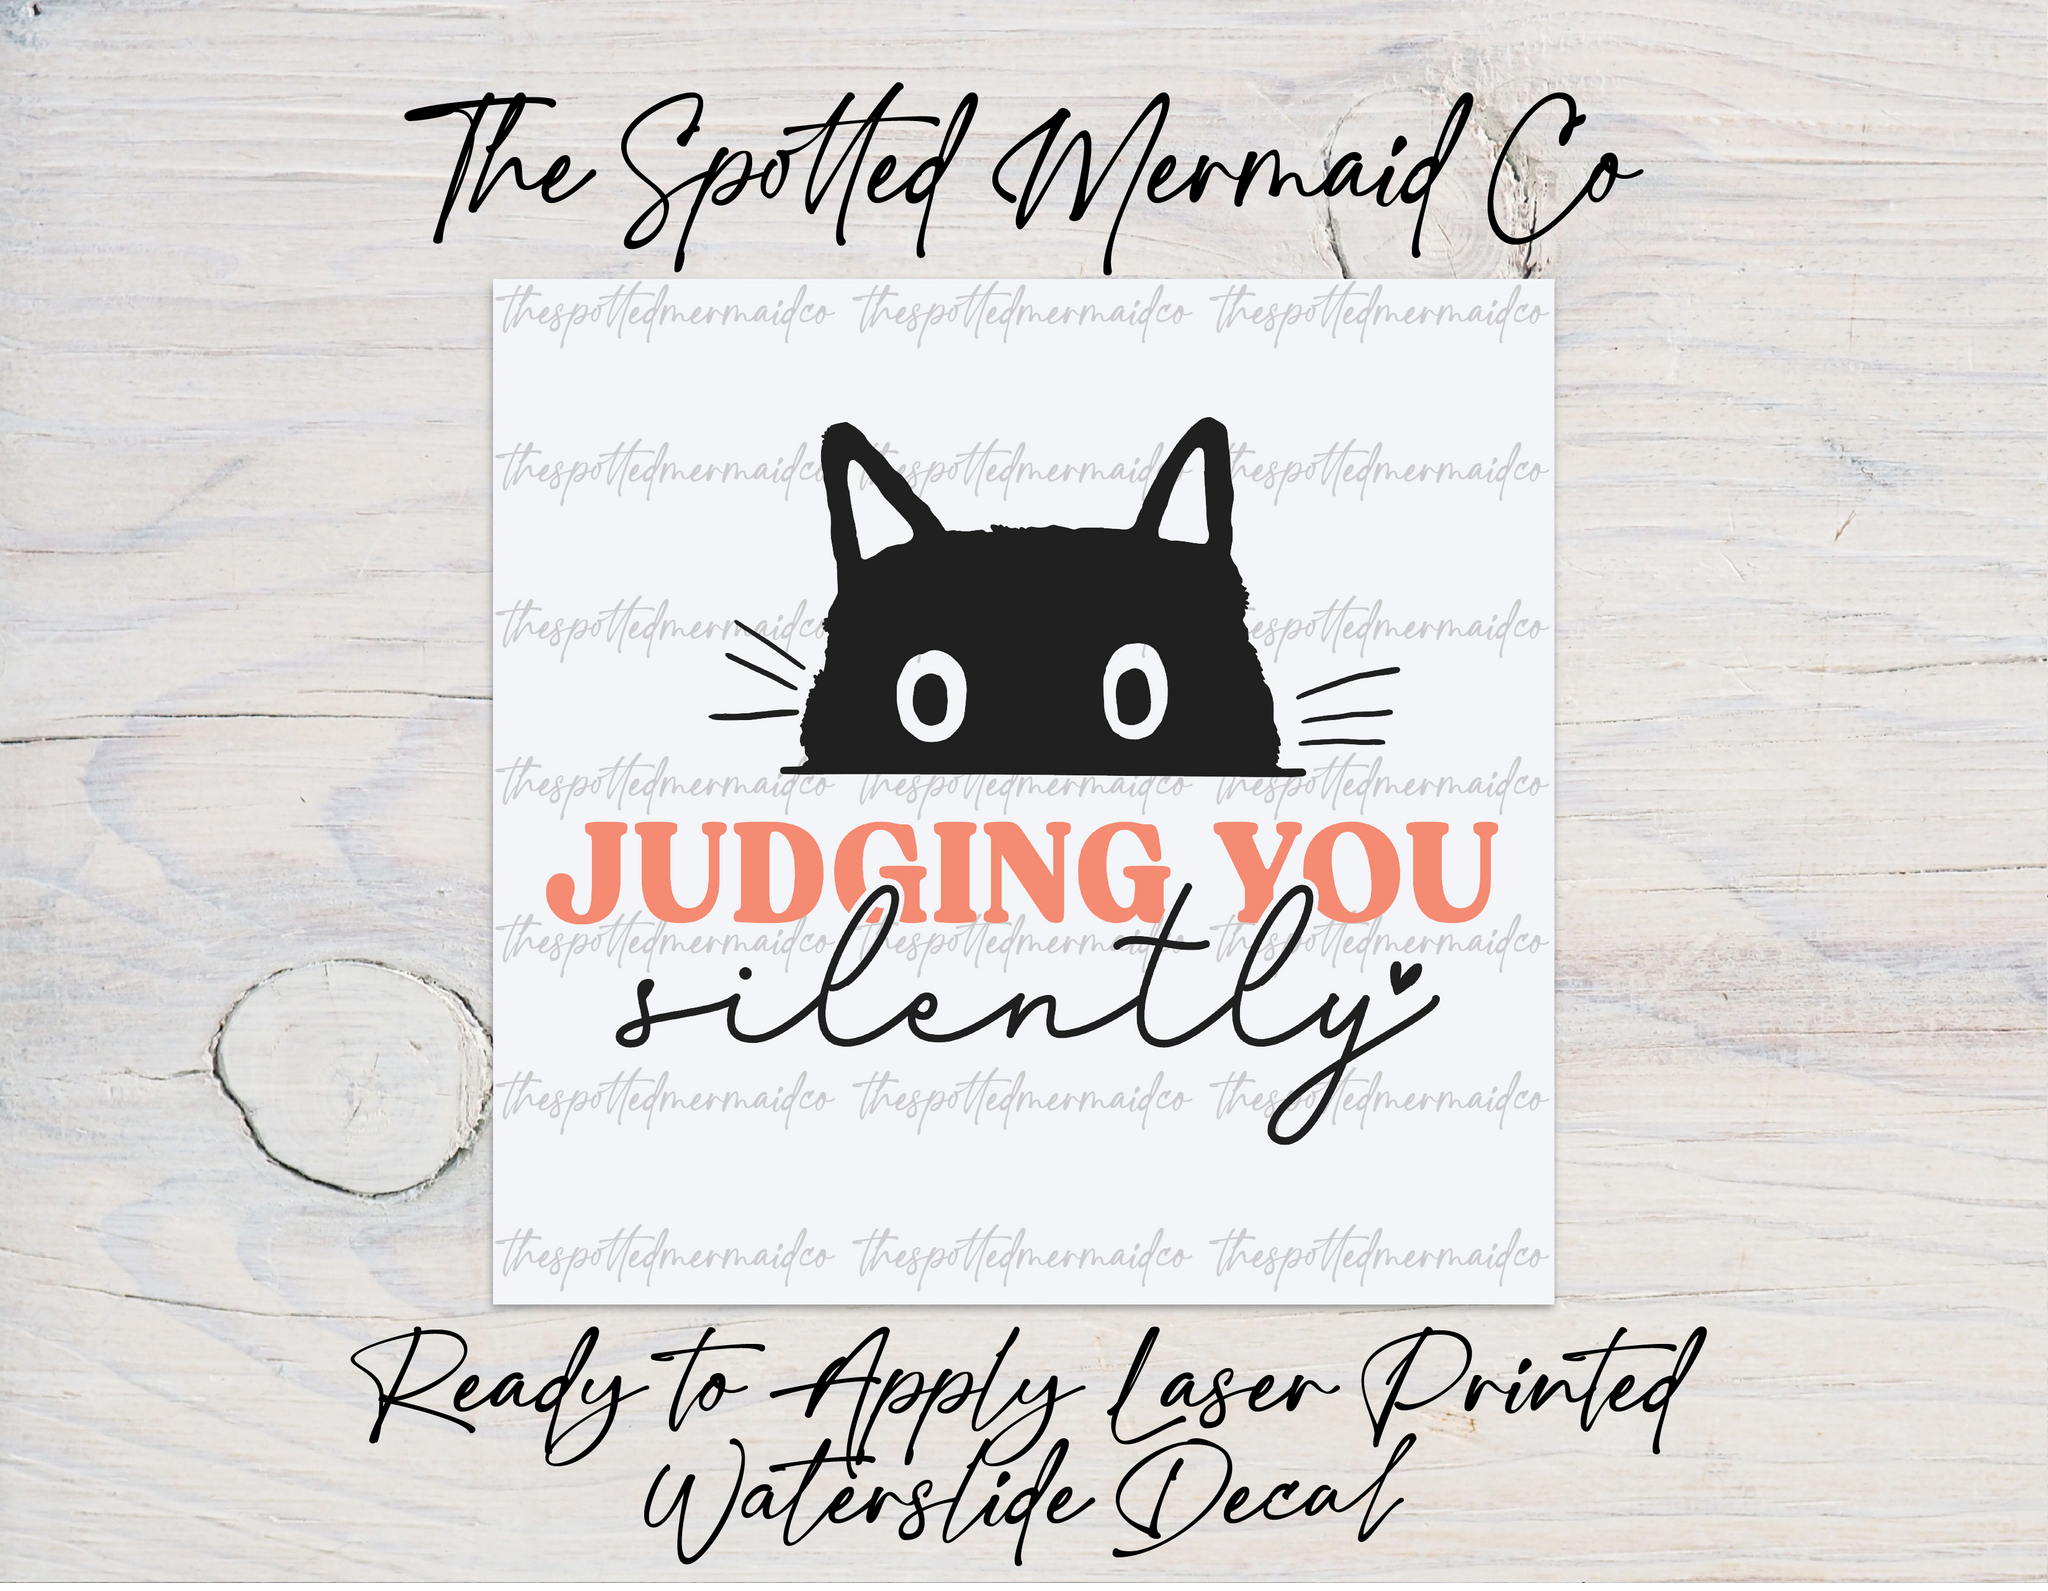 Cat Judging You Silently Waterslide Decal